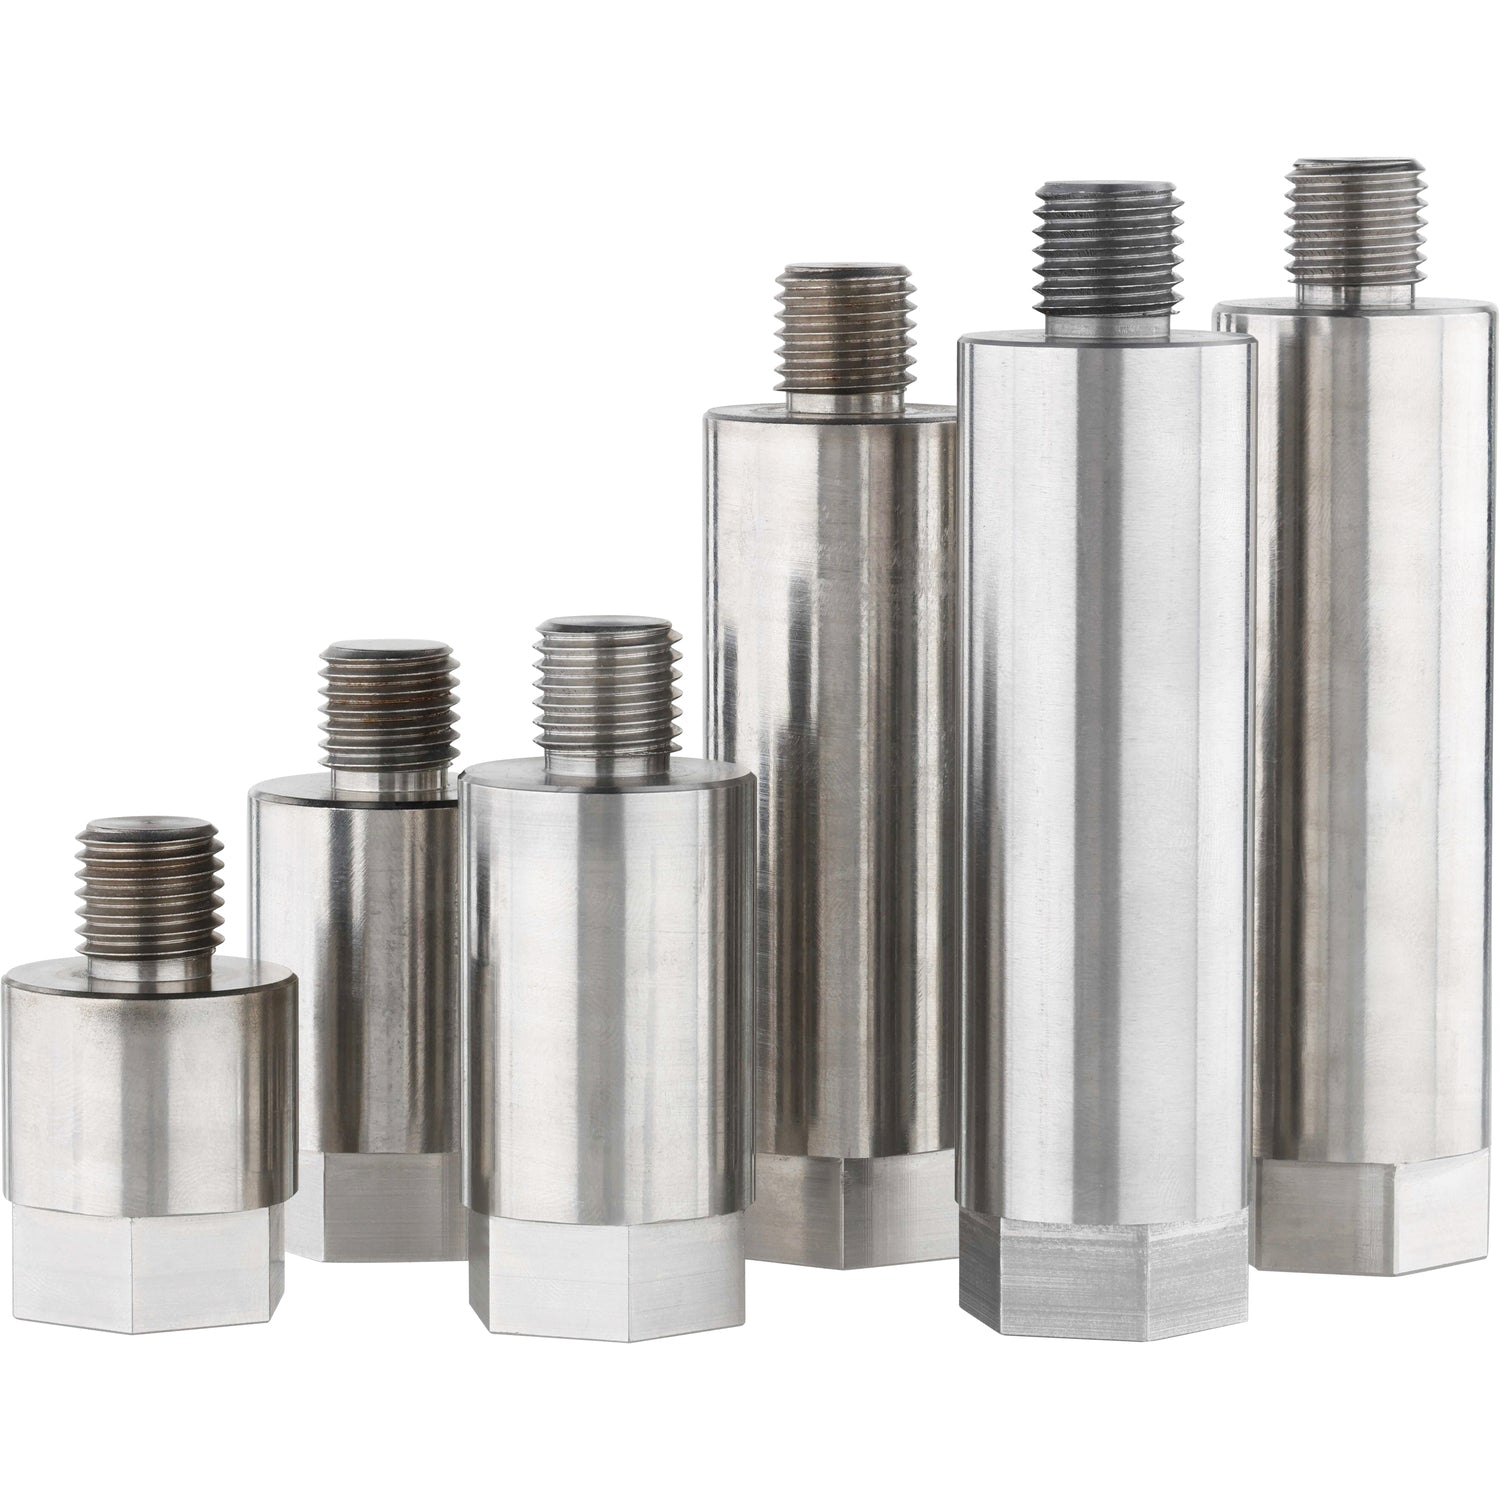 An assortment deferent length stainless steel threaded standoffs on a white background. 